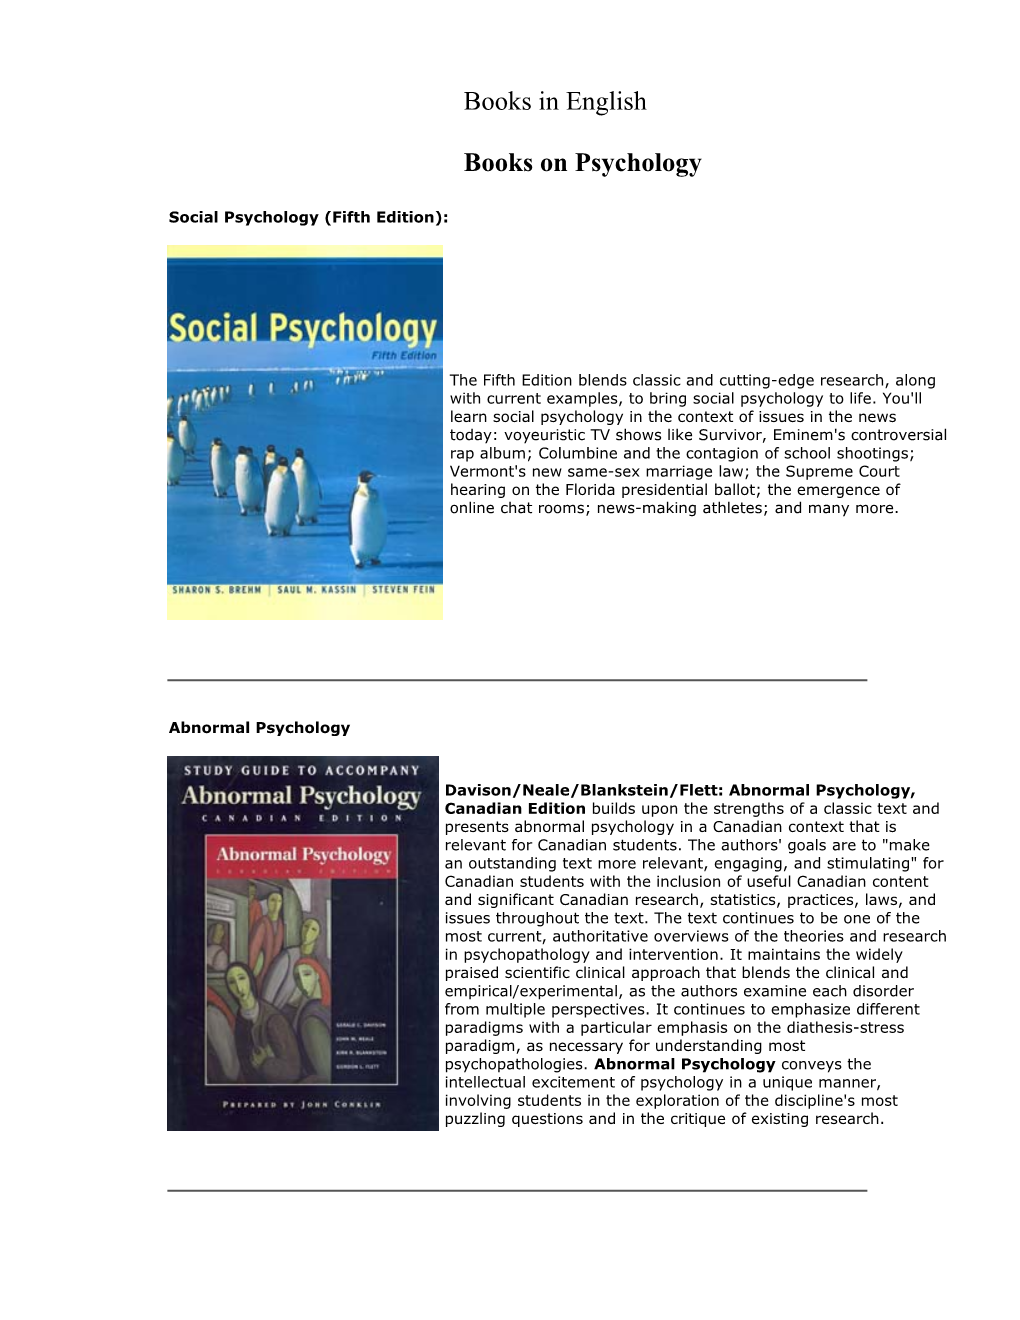 Books in English Books on Psychology